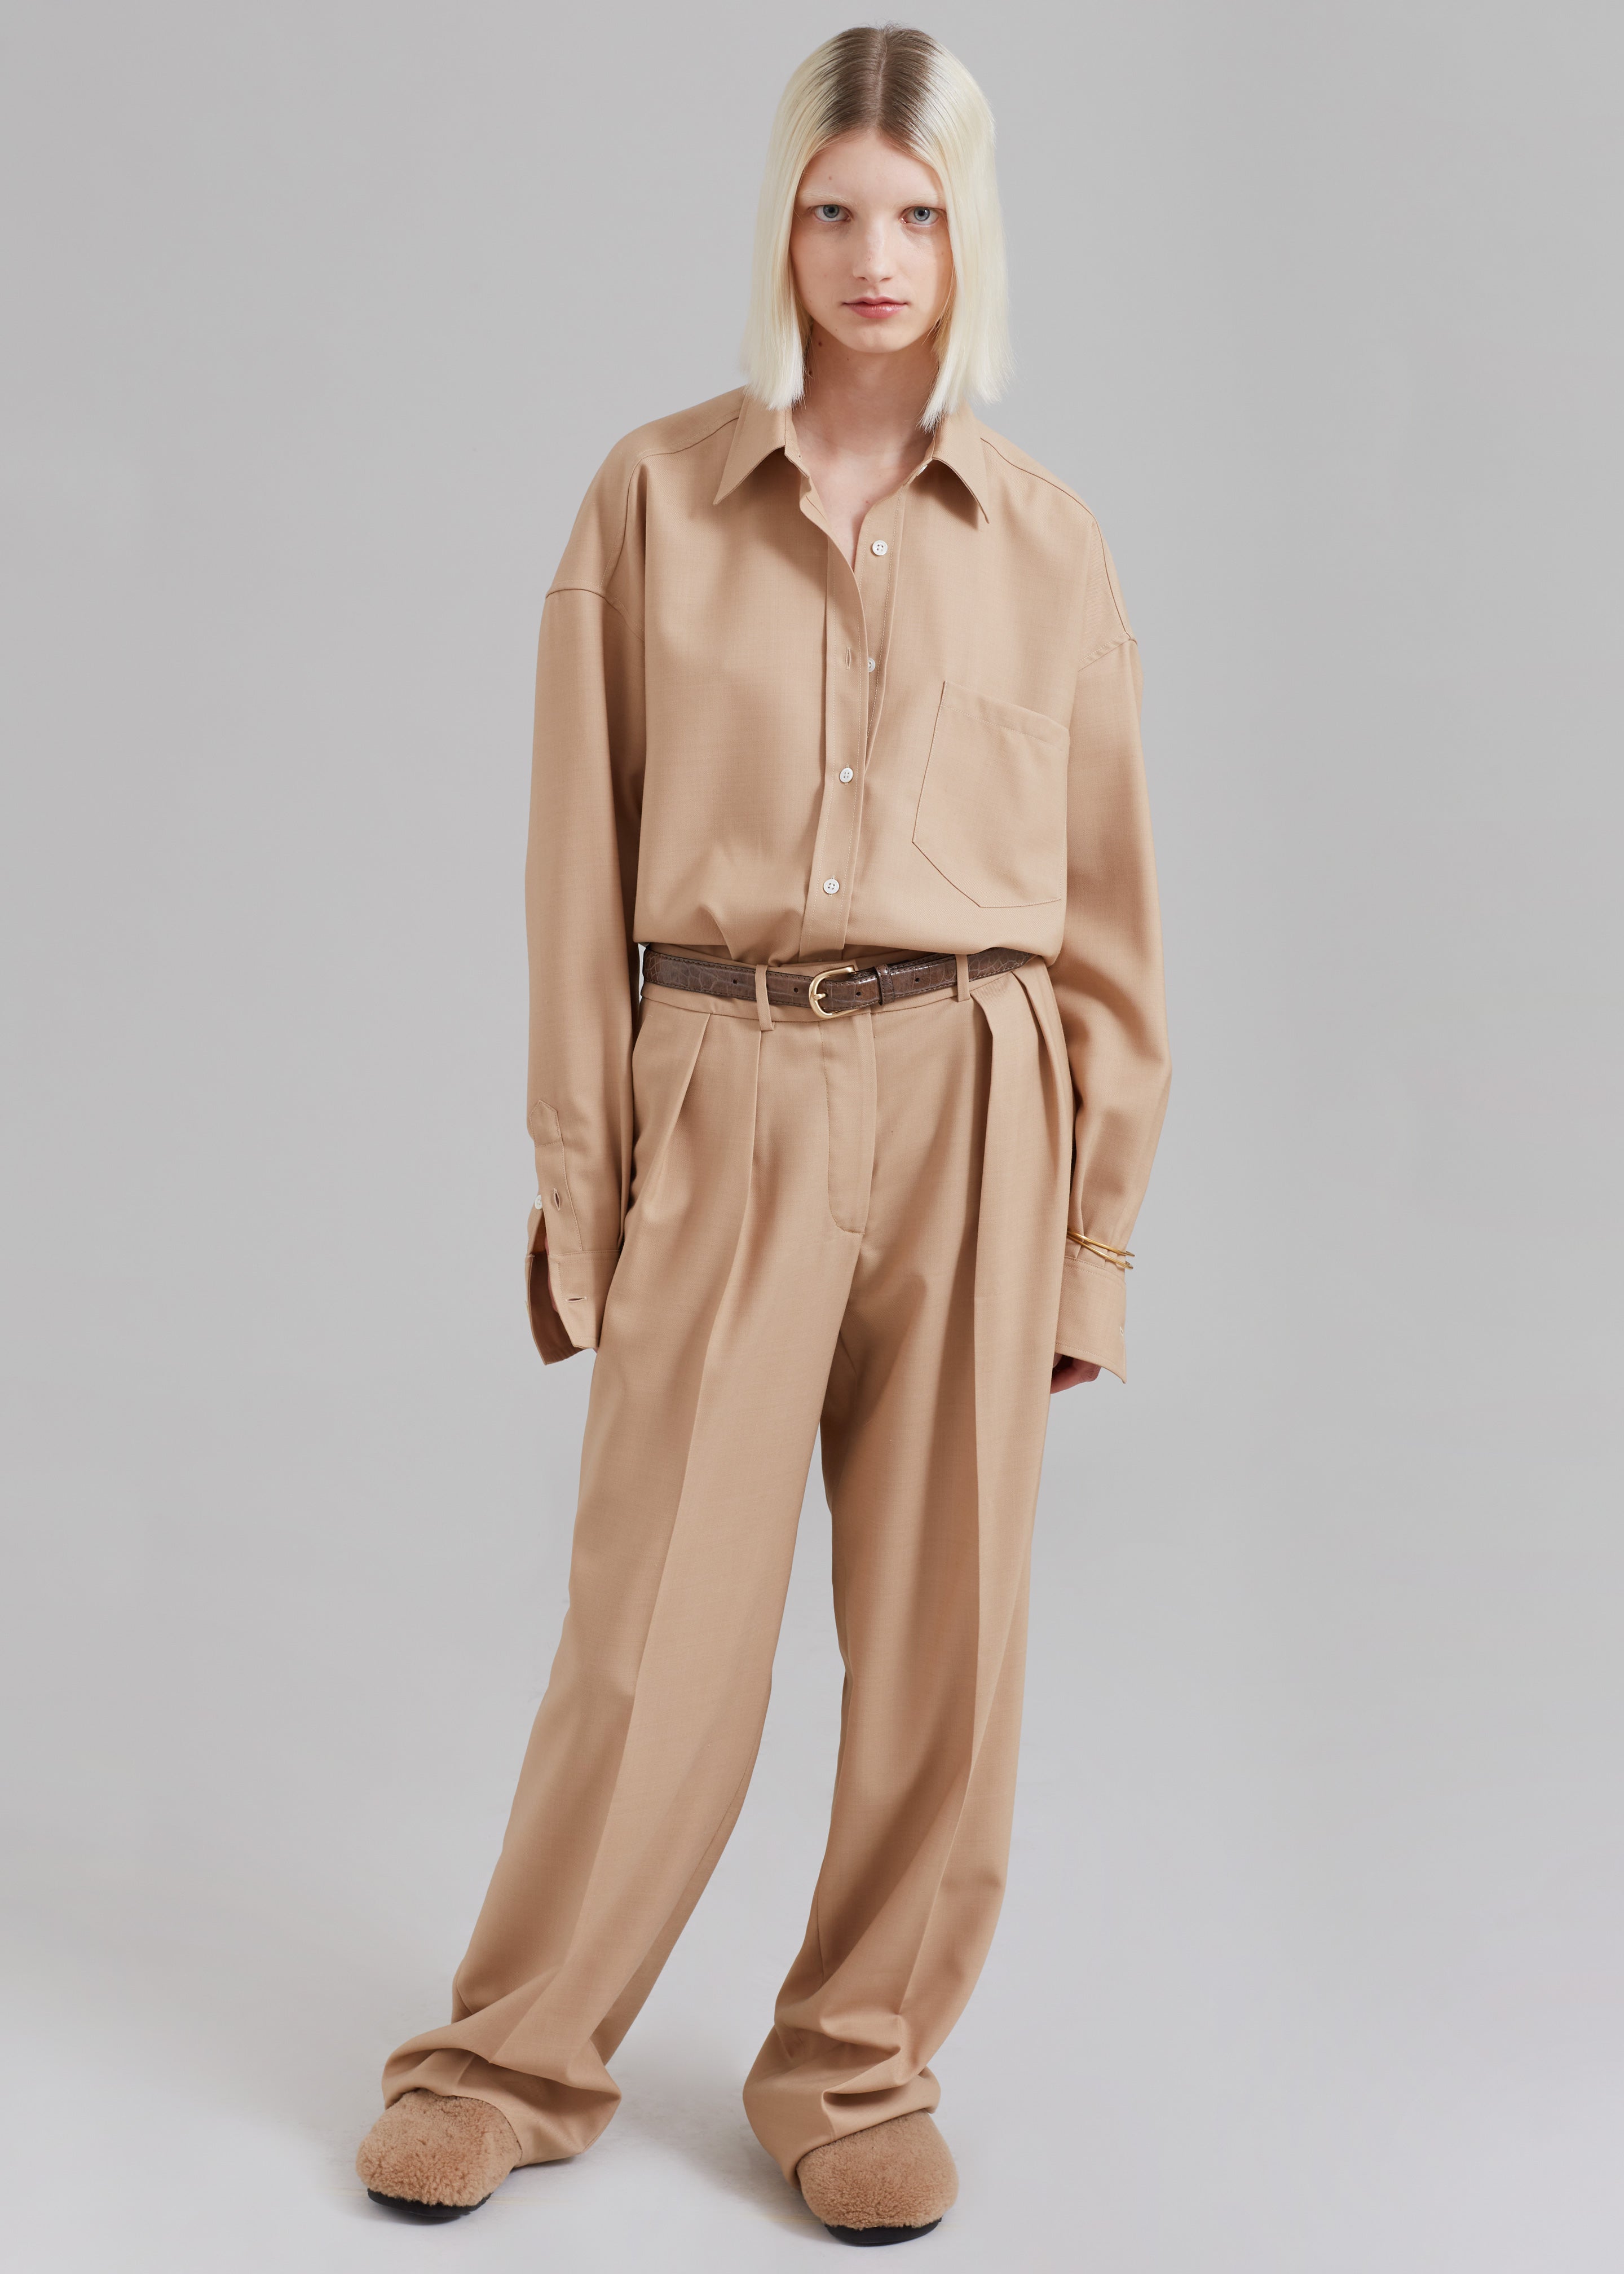 Tansy Pleated Trousers - Chocolate – The Frankie Shop